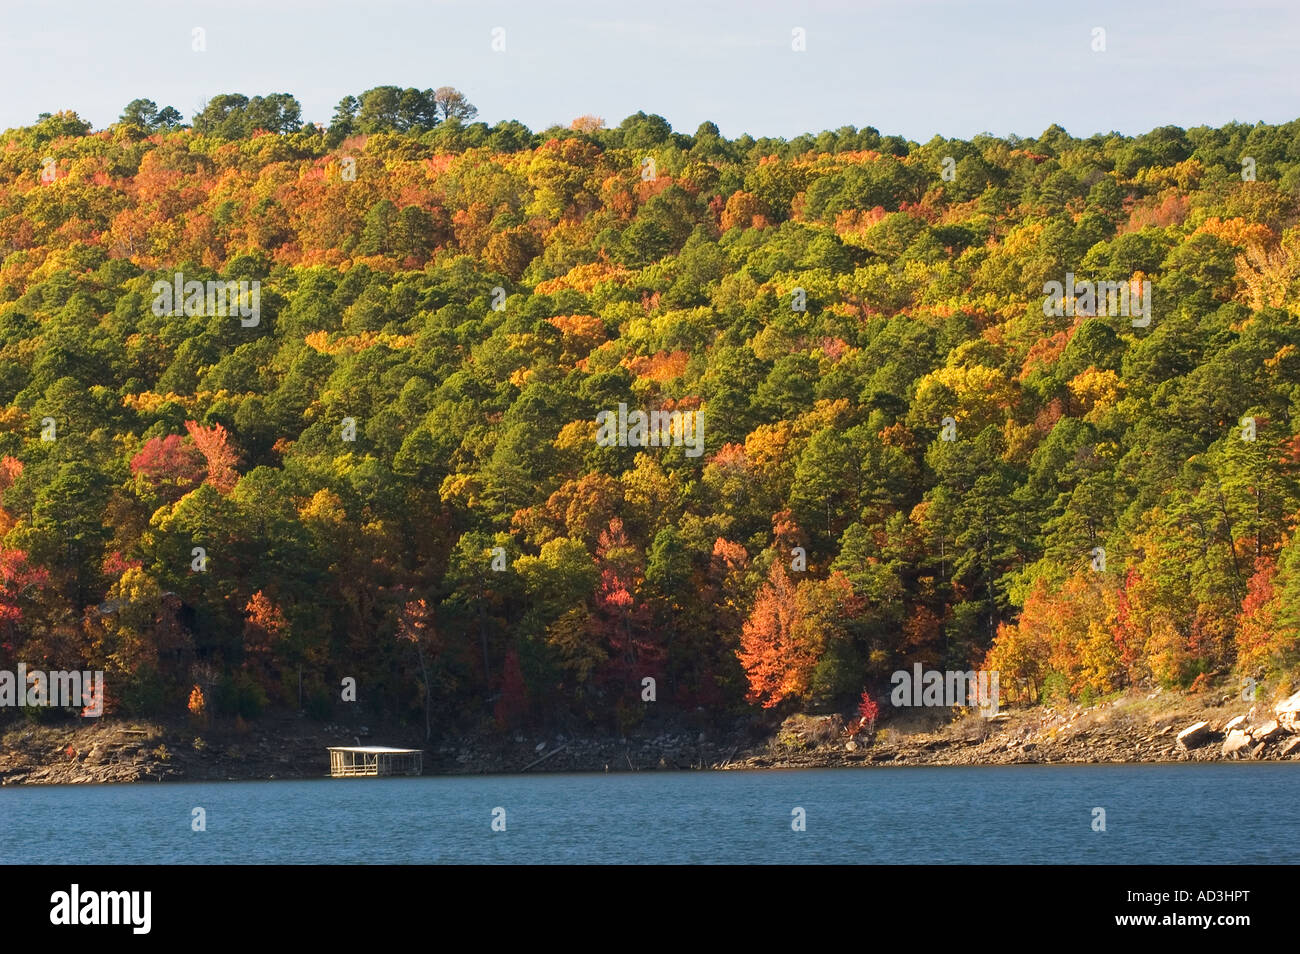 The October autumn colors of Greers Ferry Lake in the Ozark Mountains of Arkansas Stock Photo